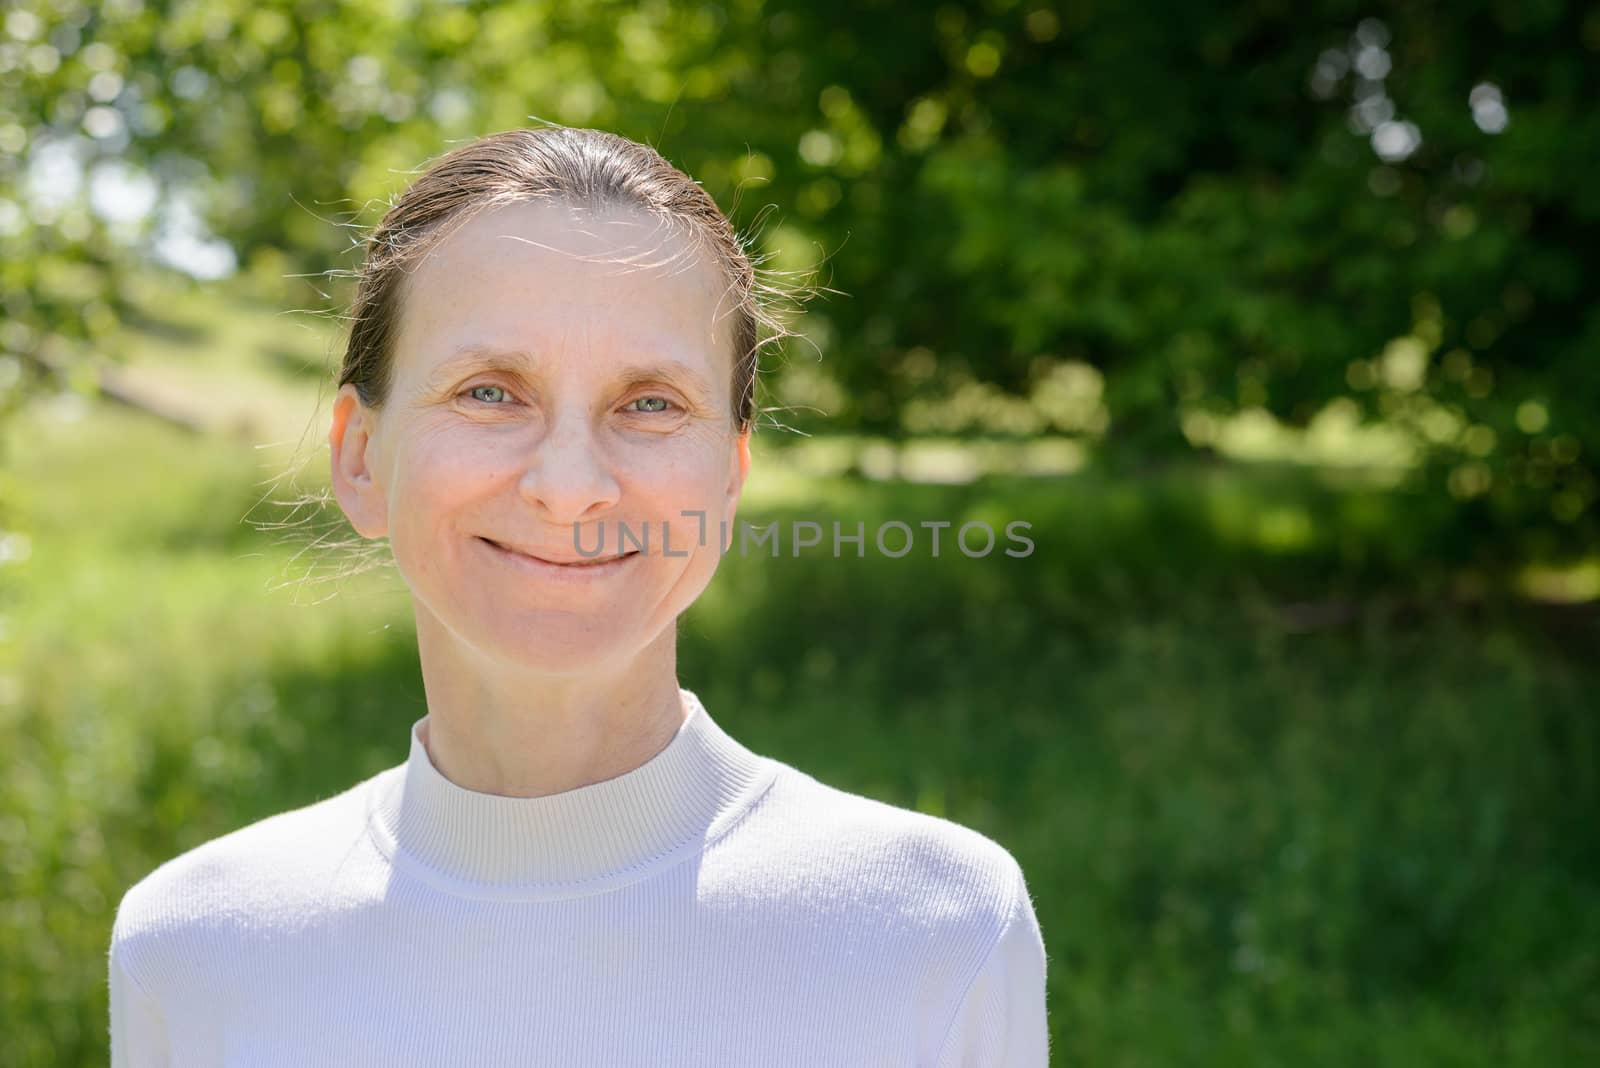 A warm portrait of a nice smiling senior woman in the park under the warm summer sun